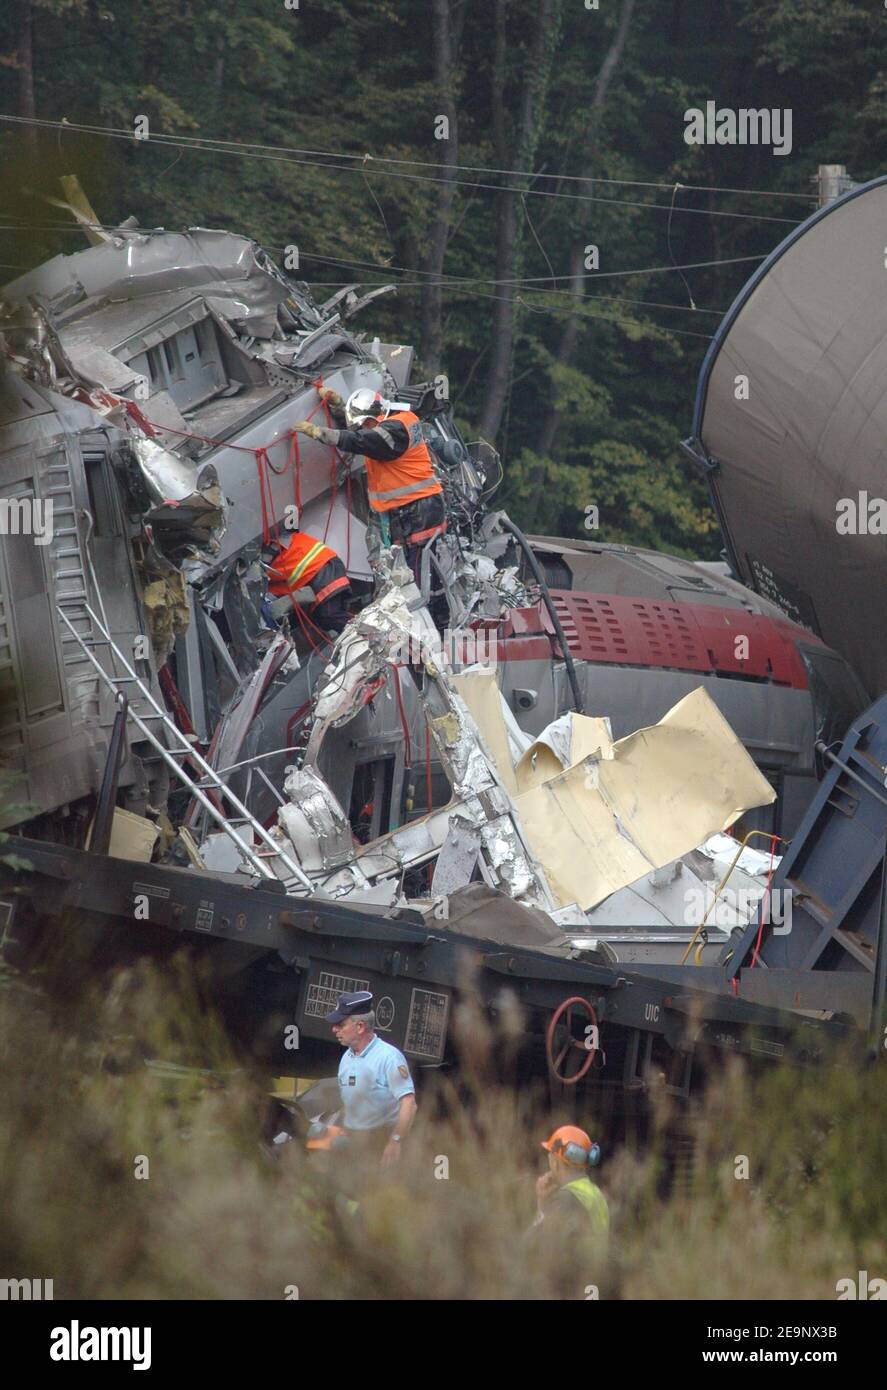 At least 5 people were killed and more than 20 injured people in a head-on collision between a passenger train and a goods train in Zoufftgen, France on October 11, 2006. The two trains were a double-decker Luxembourg-operated regional express train travelling from the grand duchy to the French city of Nancy, and a freight train heading for Luxembourg. French Prime minister Dominique de Villepin and Jean-Claude Juncker, Prime Minister of Luxembourg arrived later on the spot of this tragedy. Photo by Pierre Rebondy/ABACAPRESS.COM Stock Photo